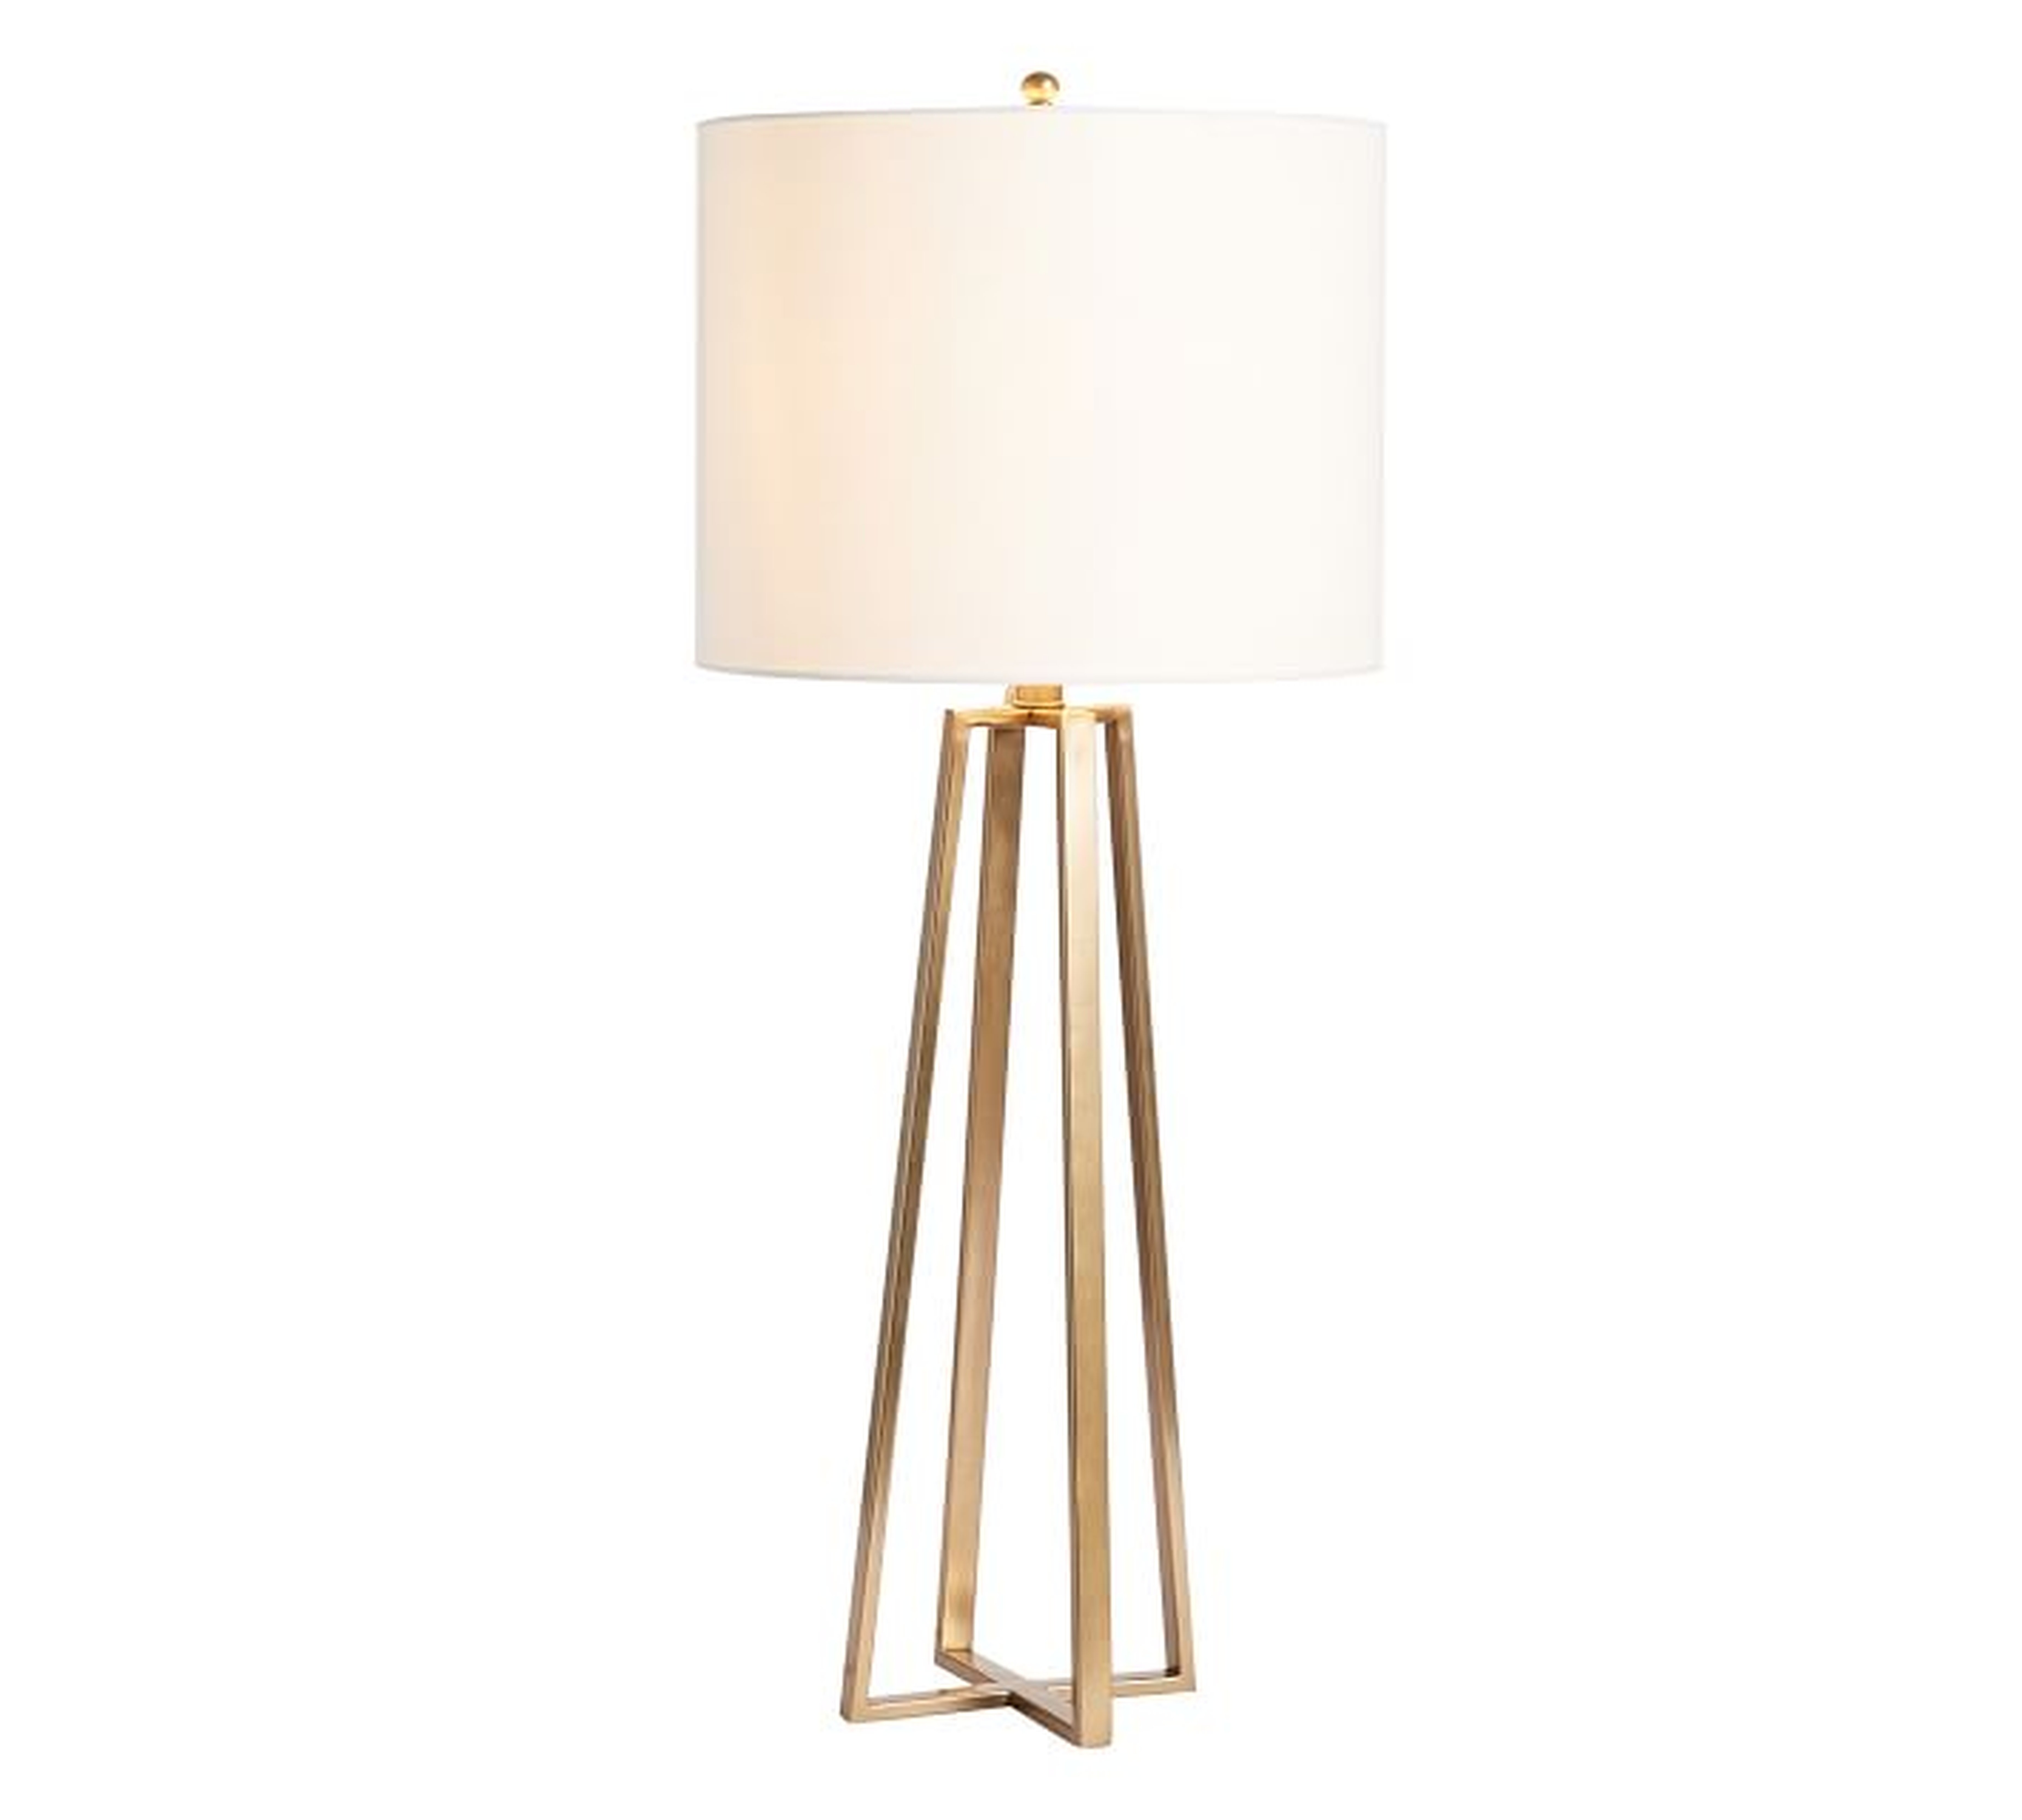 Carter Table Lamp, Champange Brass with Ivory Shade - Pottery Barn